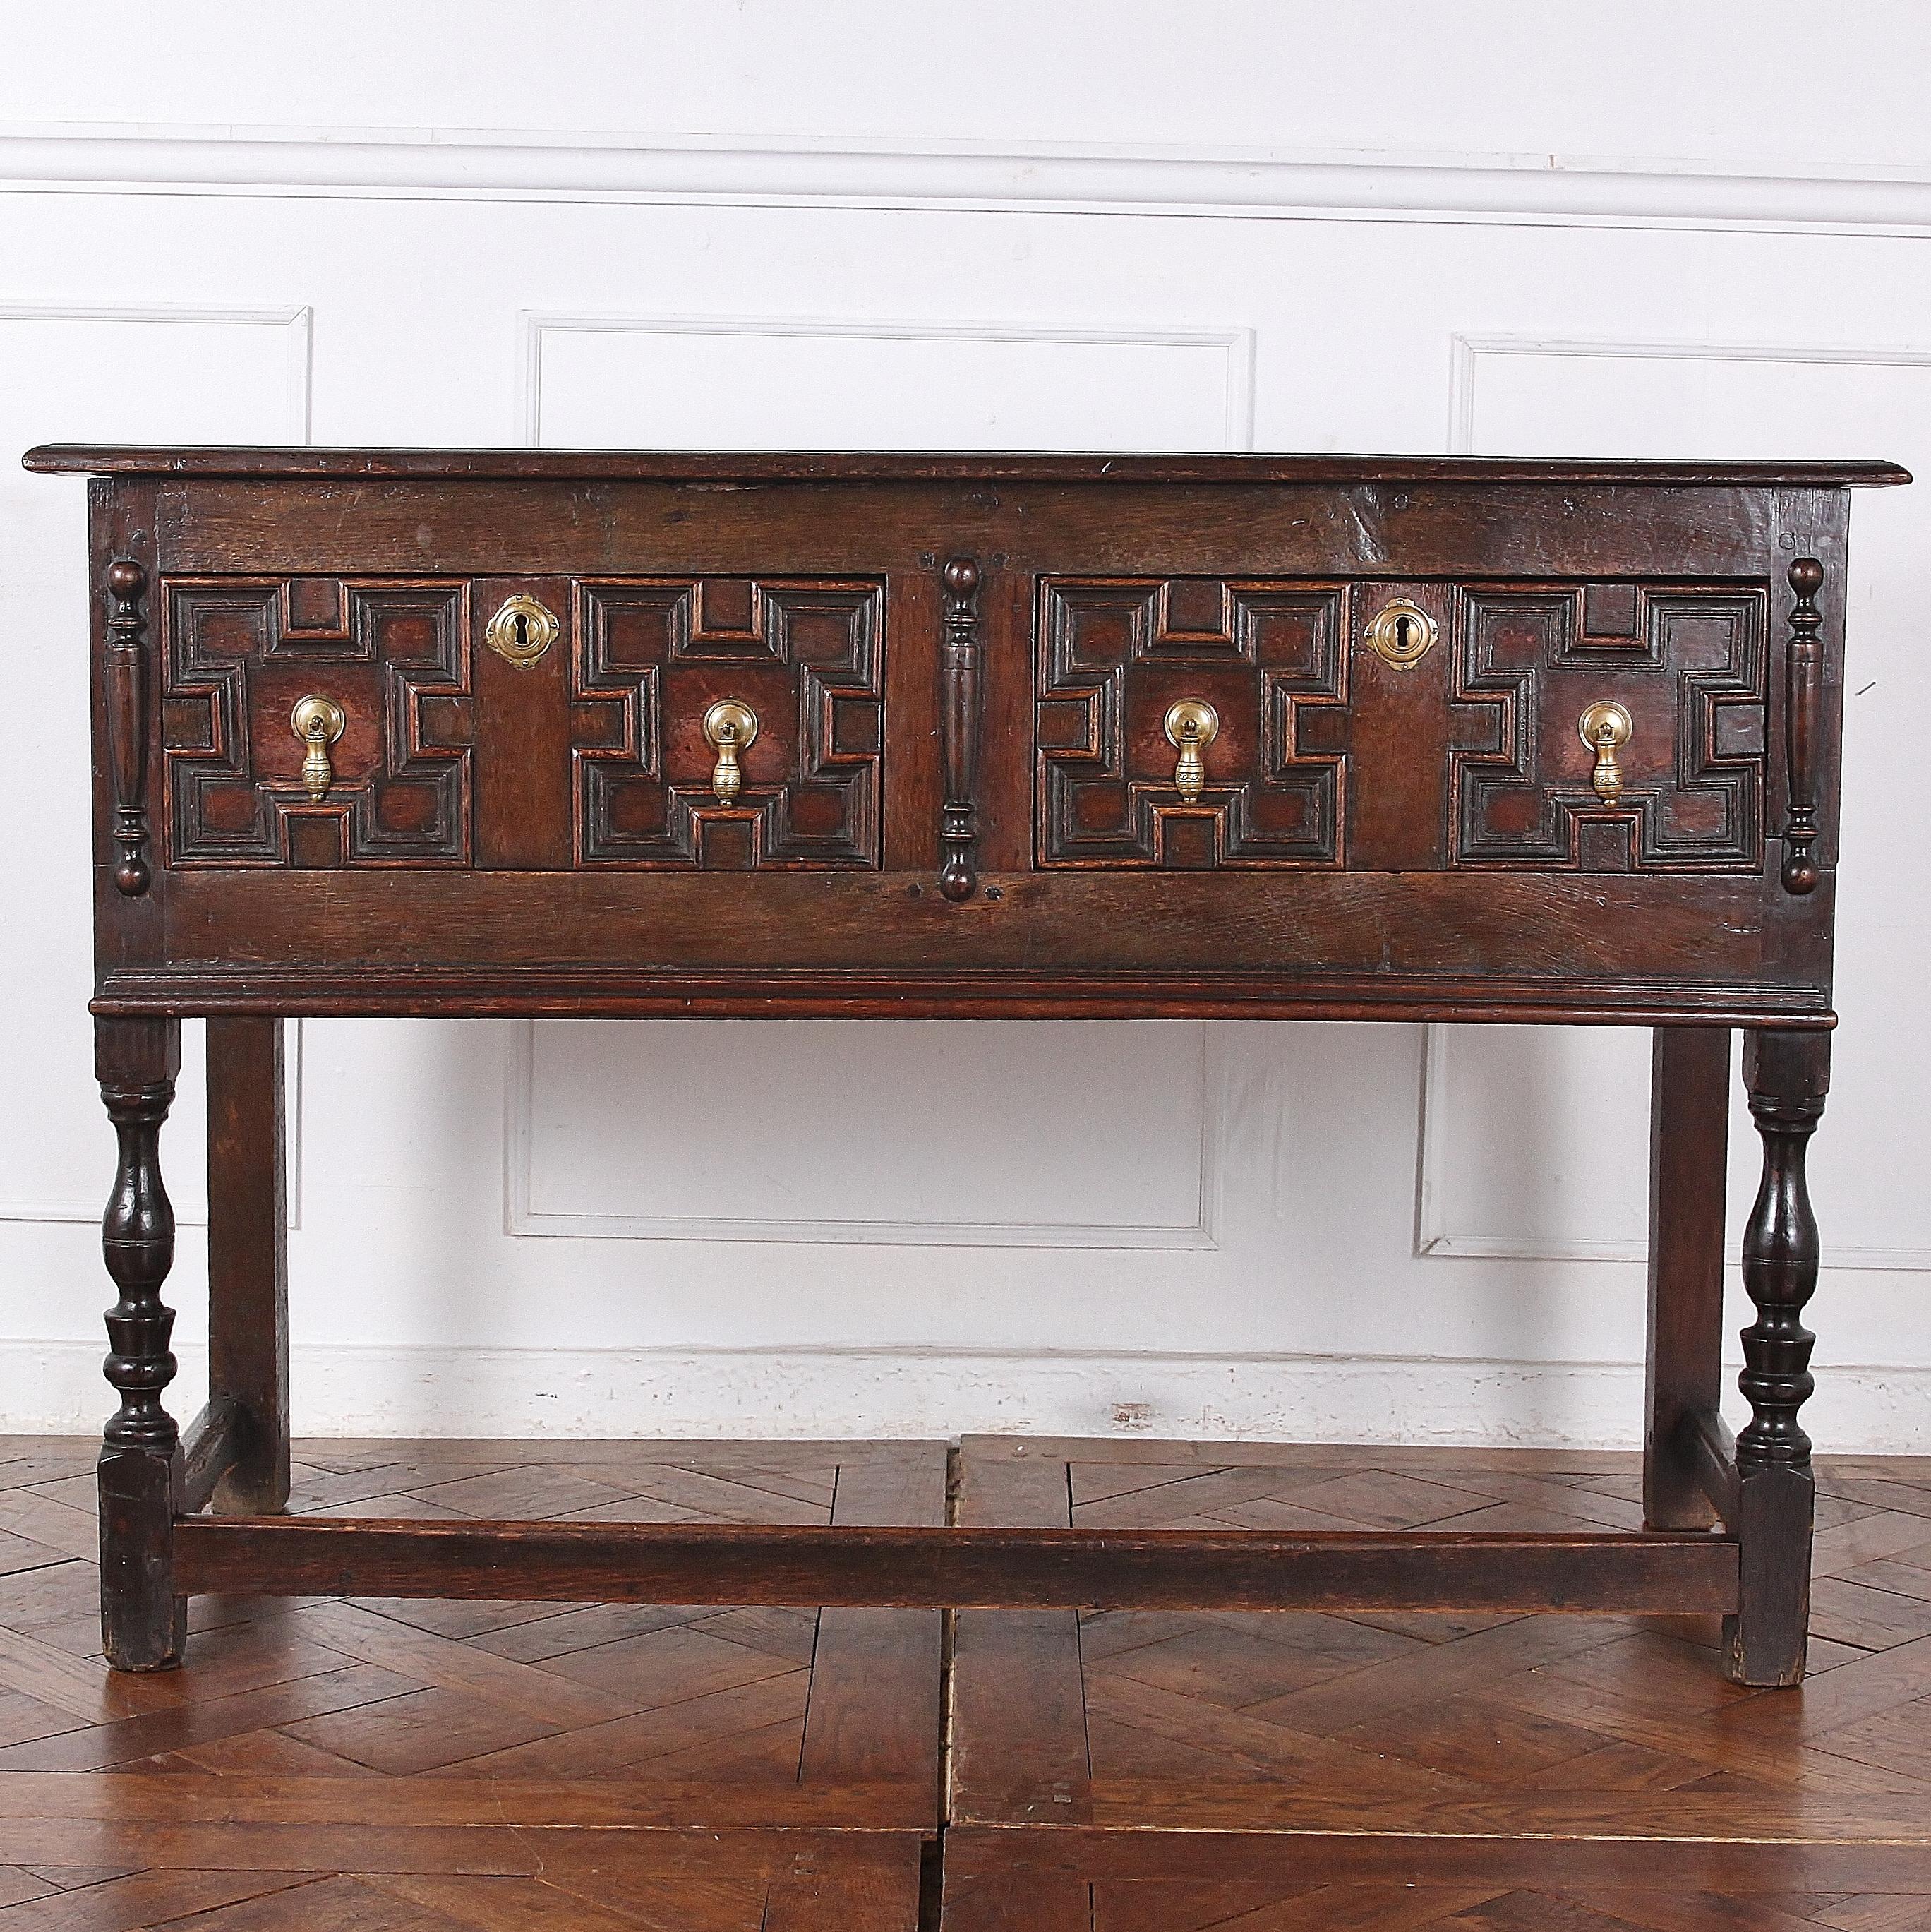 Solid oak Jacobean-style dresser or server with paneled drawer fronts and brass drop pulls, the whole raised on turned legs united by an oak stretcher. The piece has a deep warm color and mellow patina. Sturdy and suitable for everyday use.